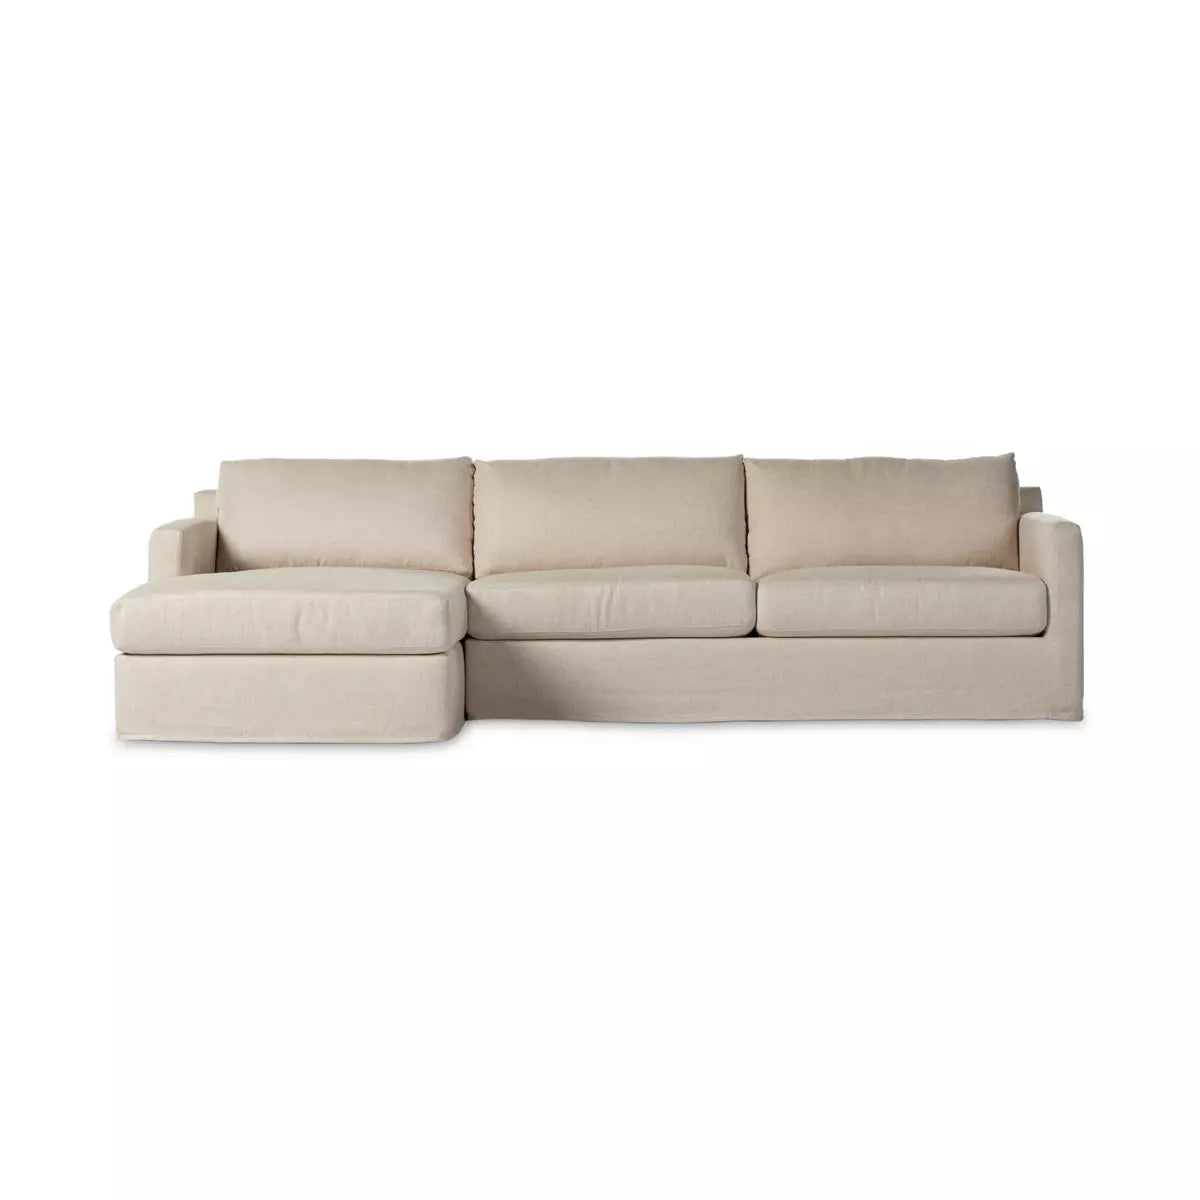 Hampton 2-Piece Slipcover Sectional Left Chaise Evere Creme